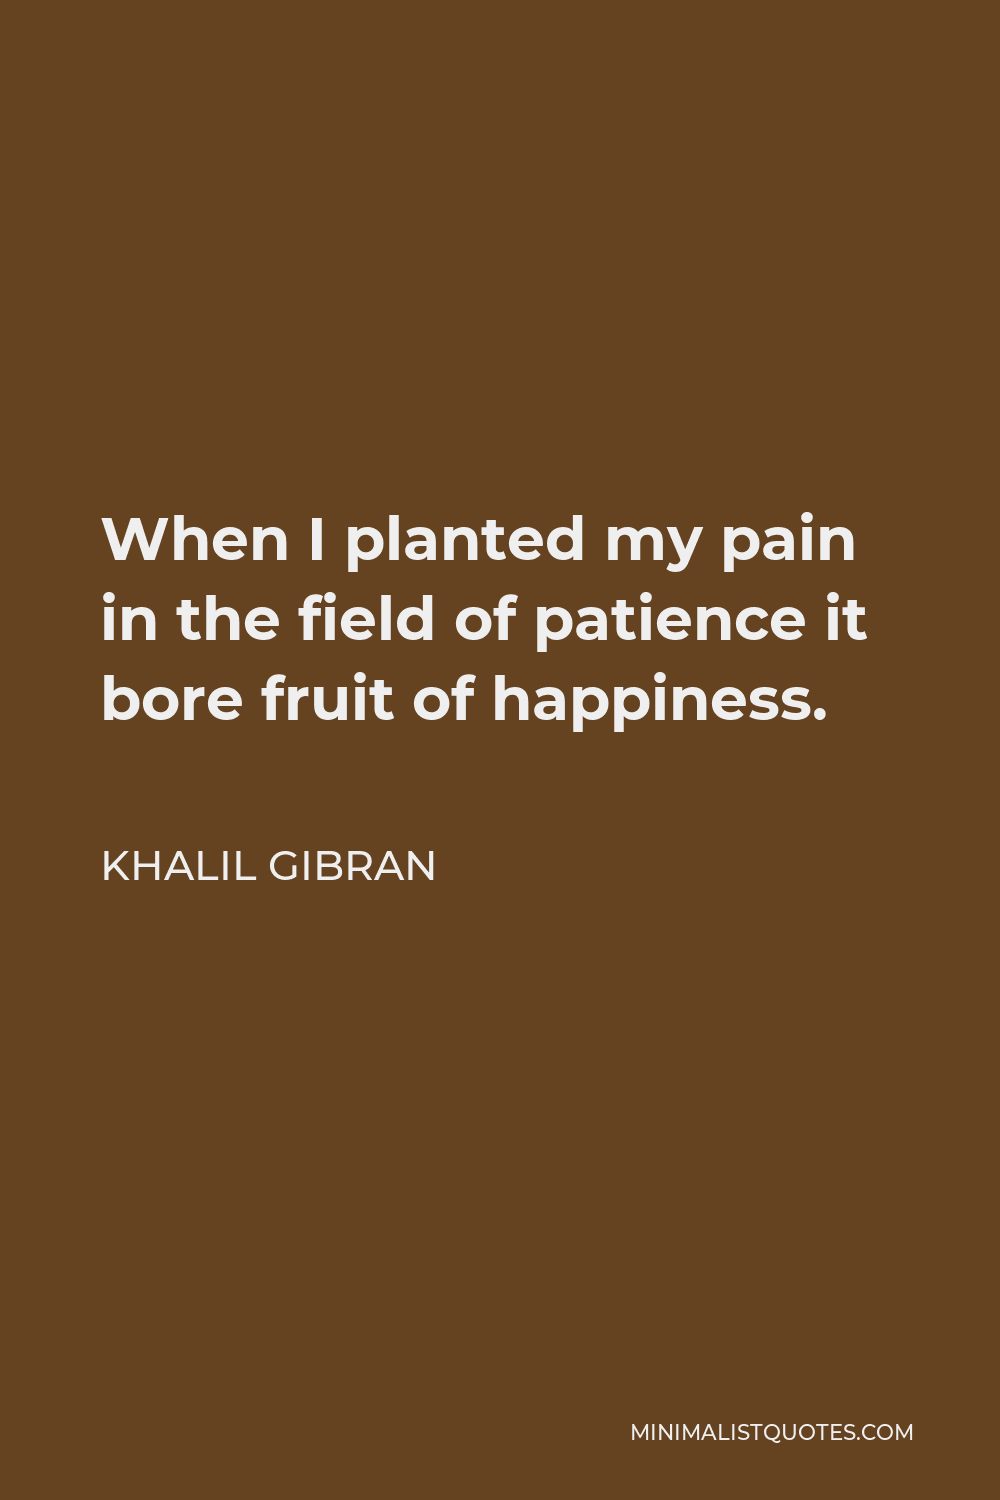 Khalil Gibran Quote - When I planted my pain in the field of patience it bore fruit of happiness.